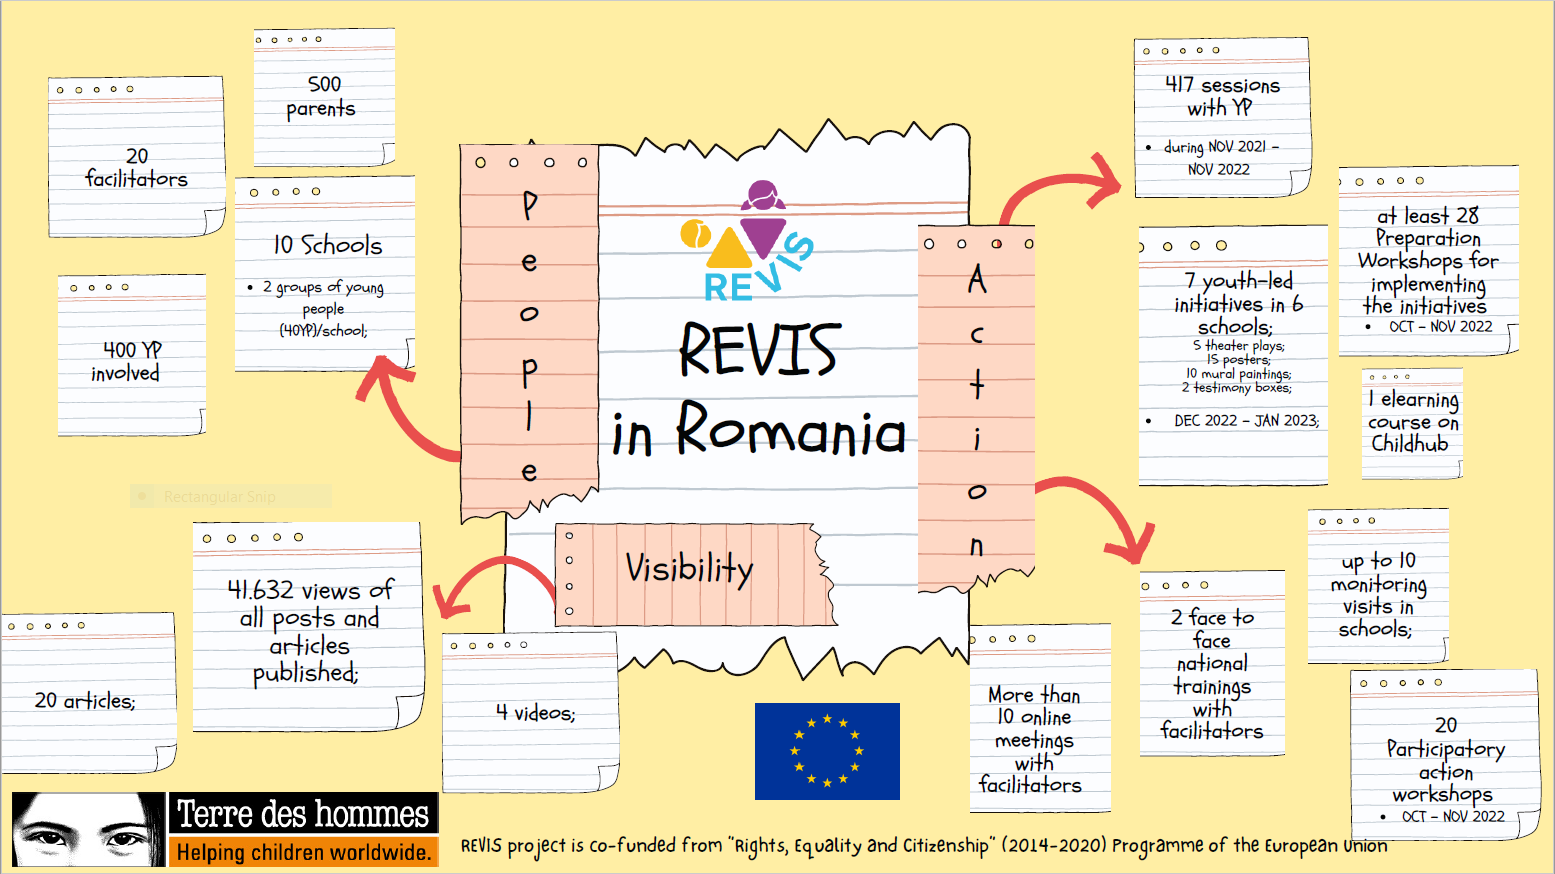 REVIS project figures in Romania